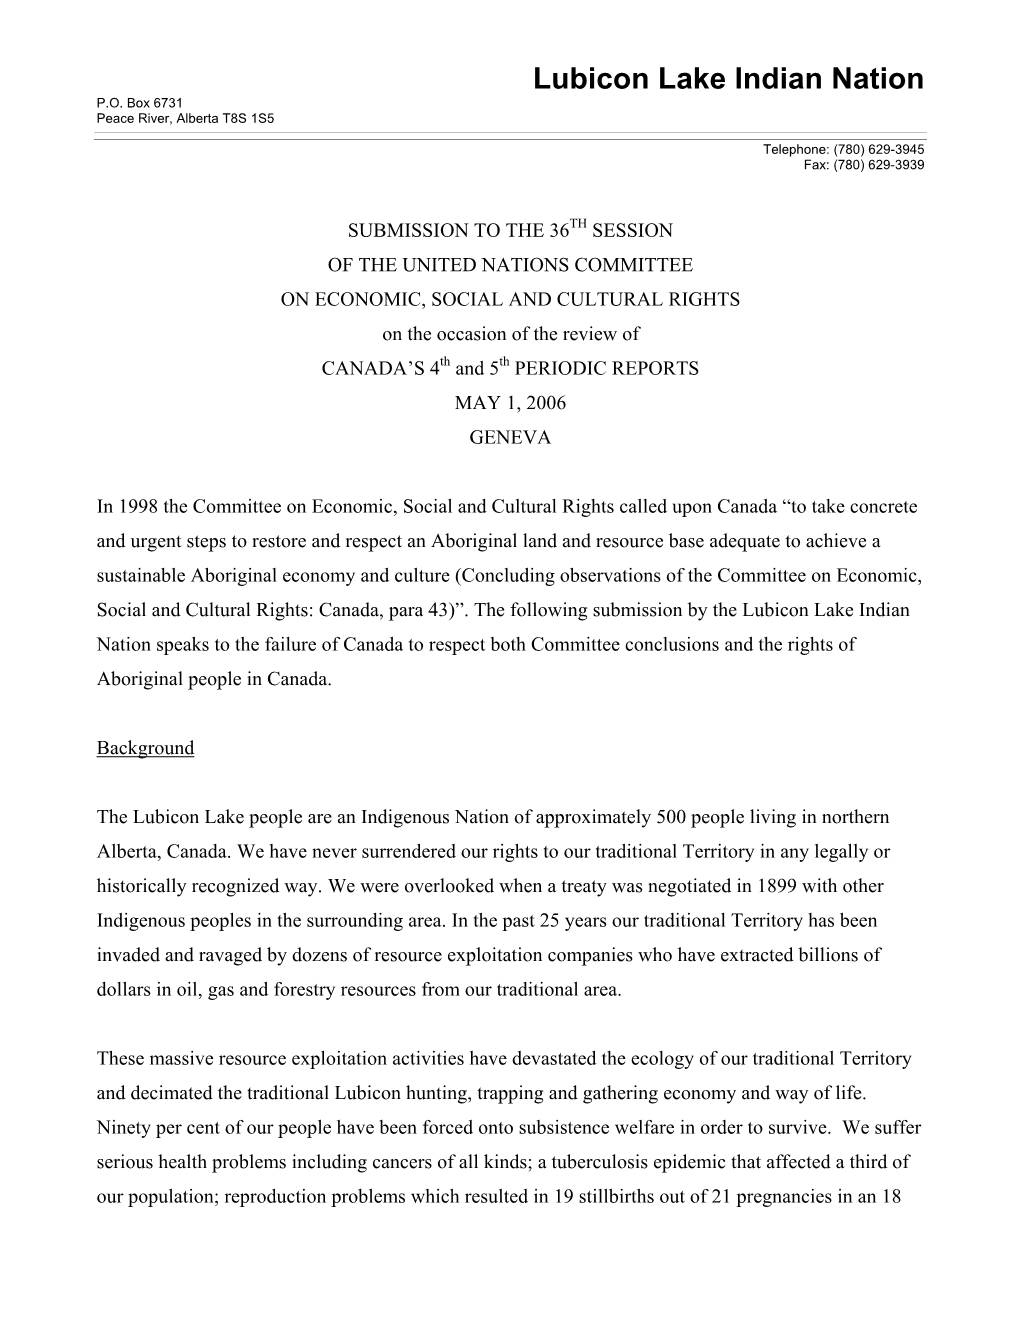 Lubicon Lake Indian Nation Submission to the United Nations on the Occassion of the Review Of